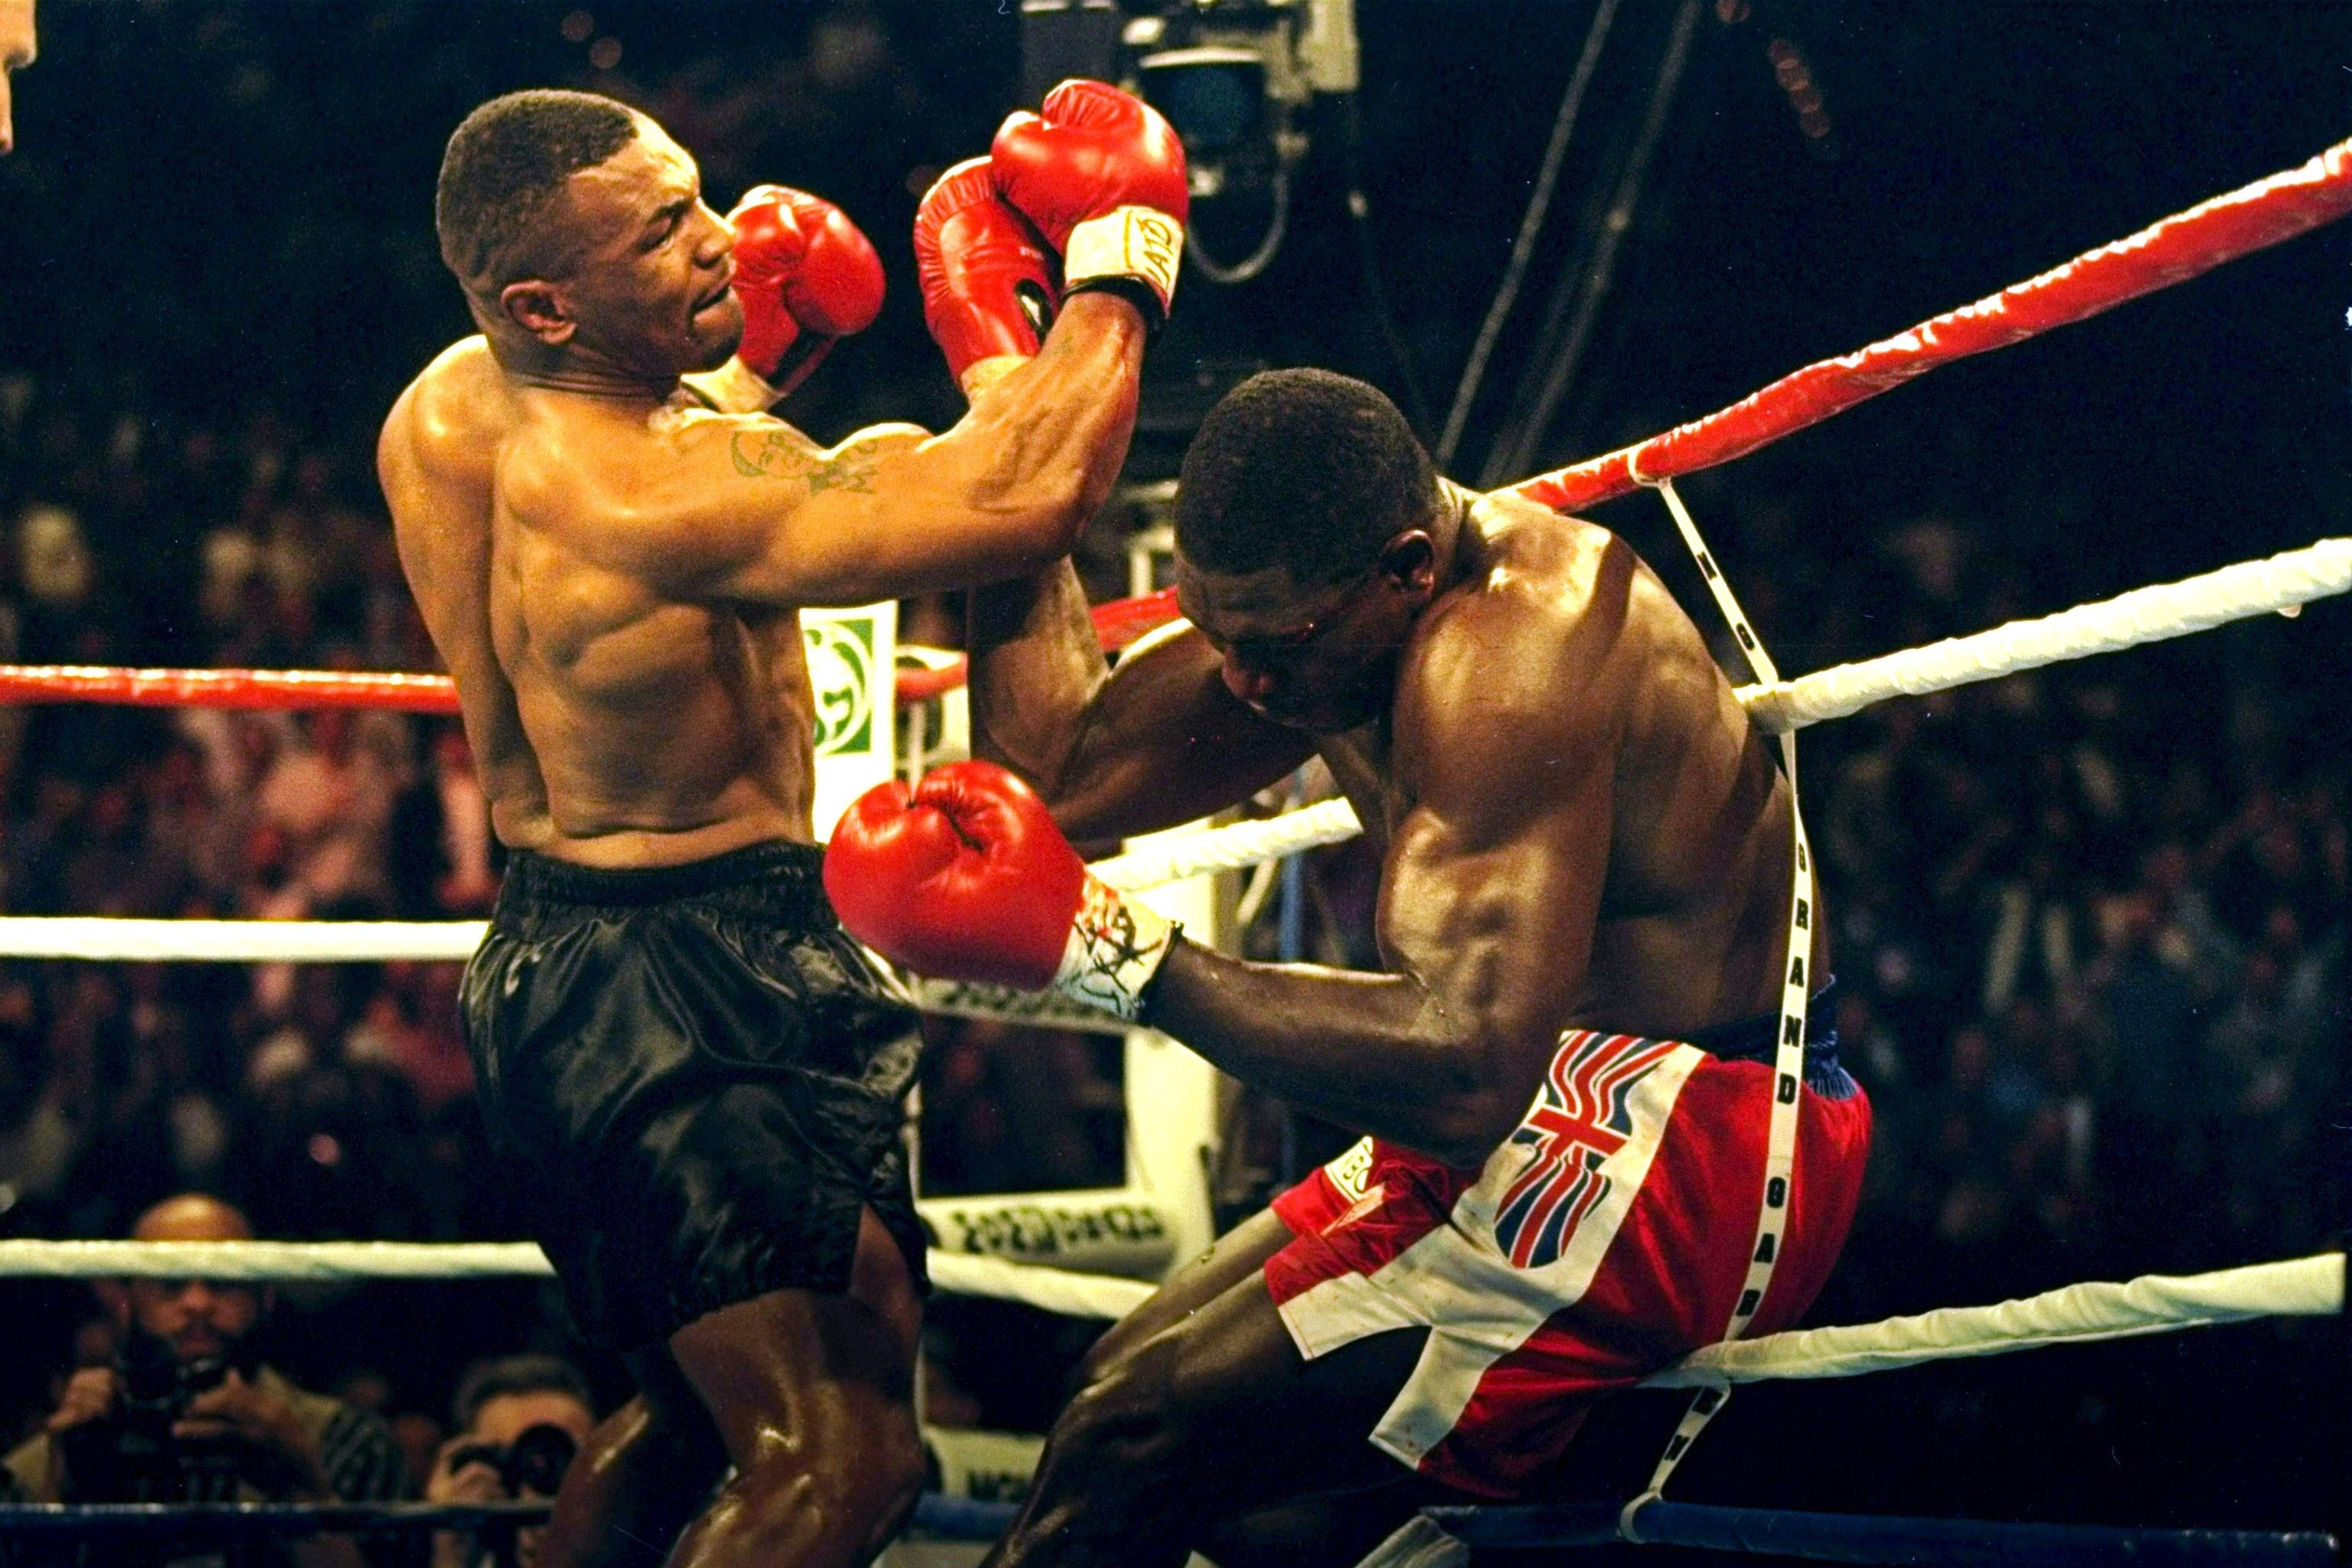 Ranking the 10 Most Destructive Punches in Boxing Today